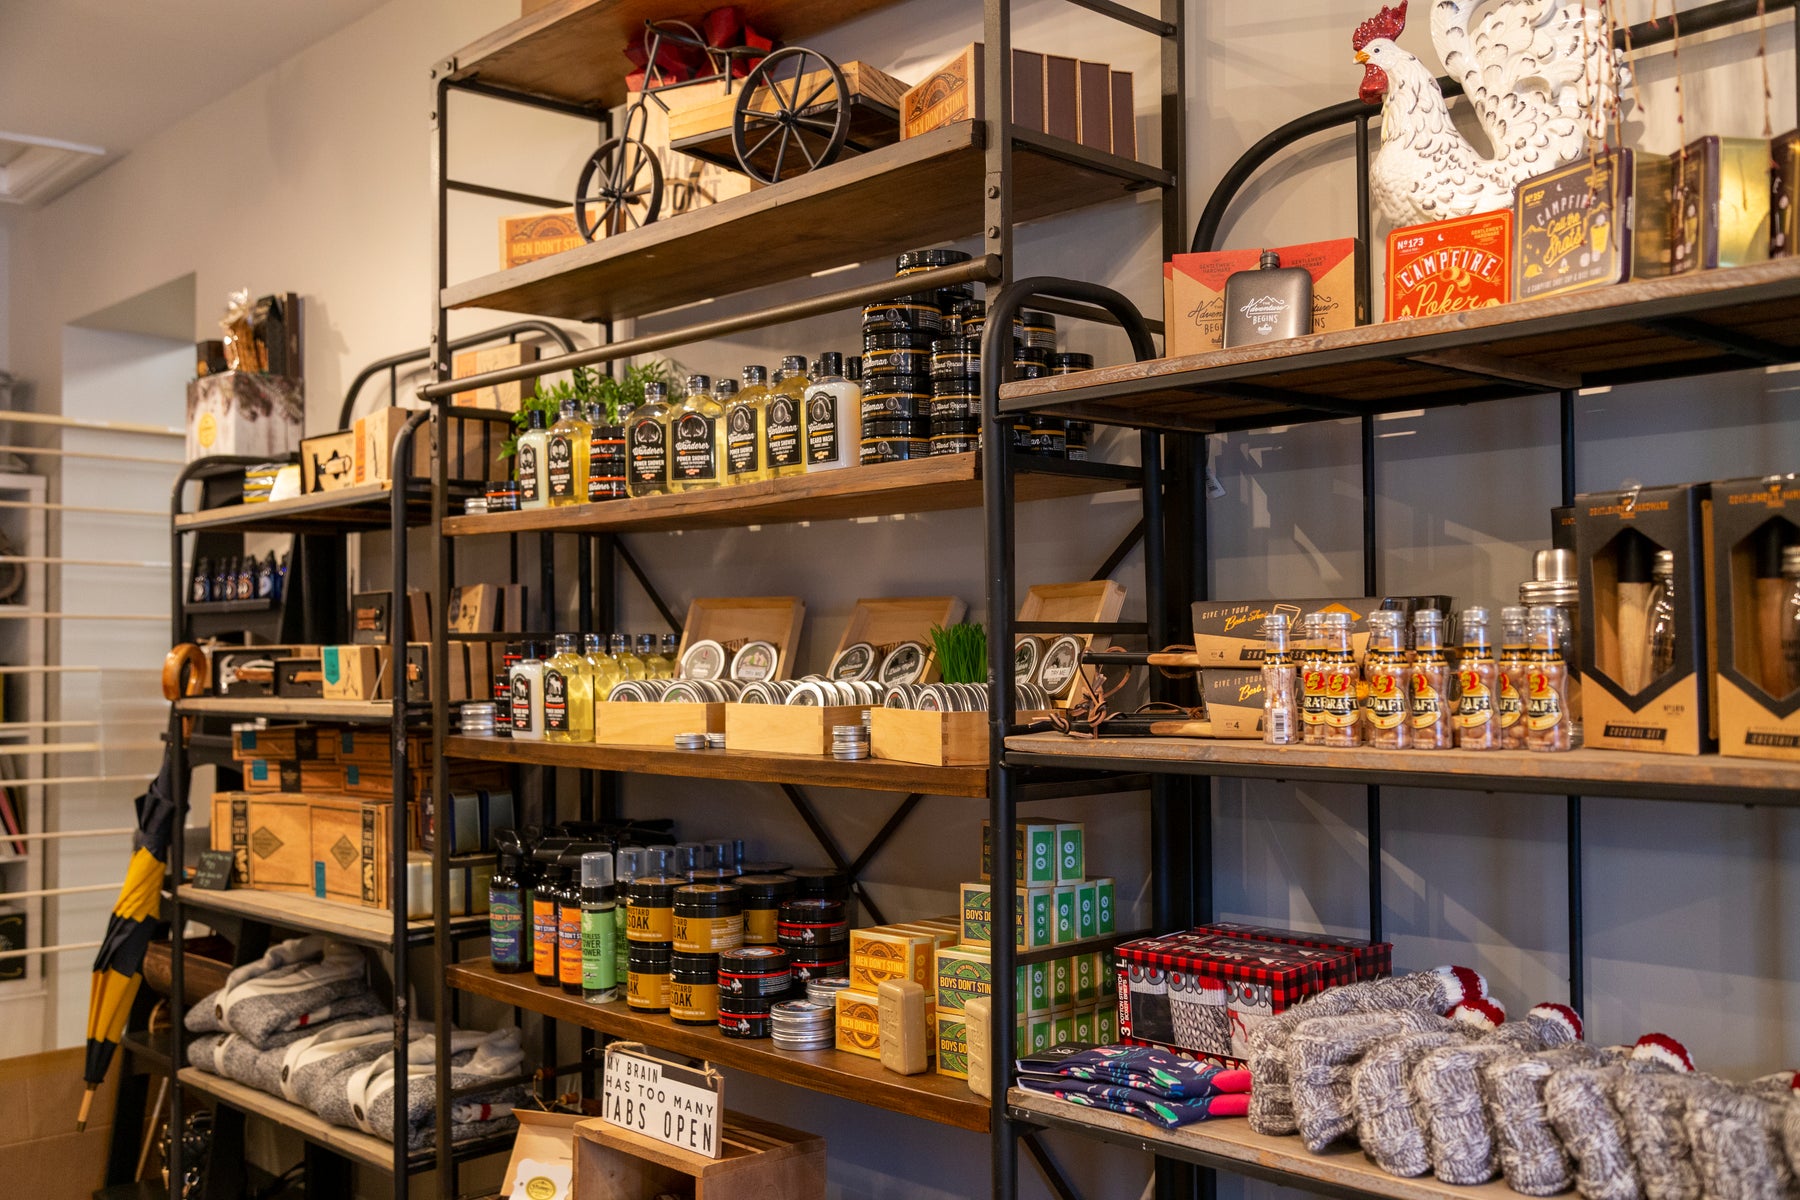 Three shelves filled with various products from Walton Woods Farm.